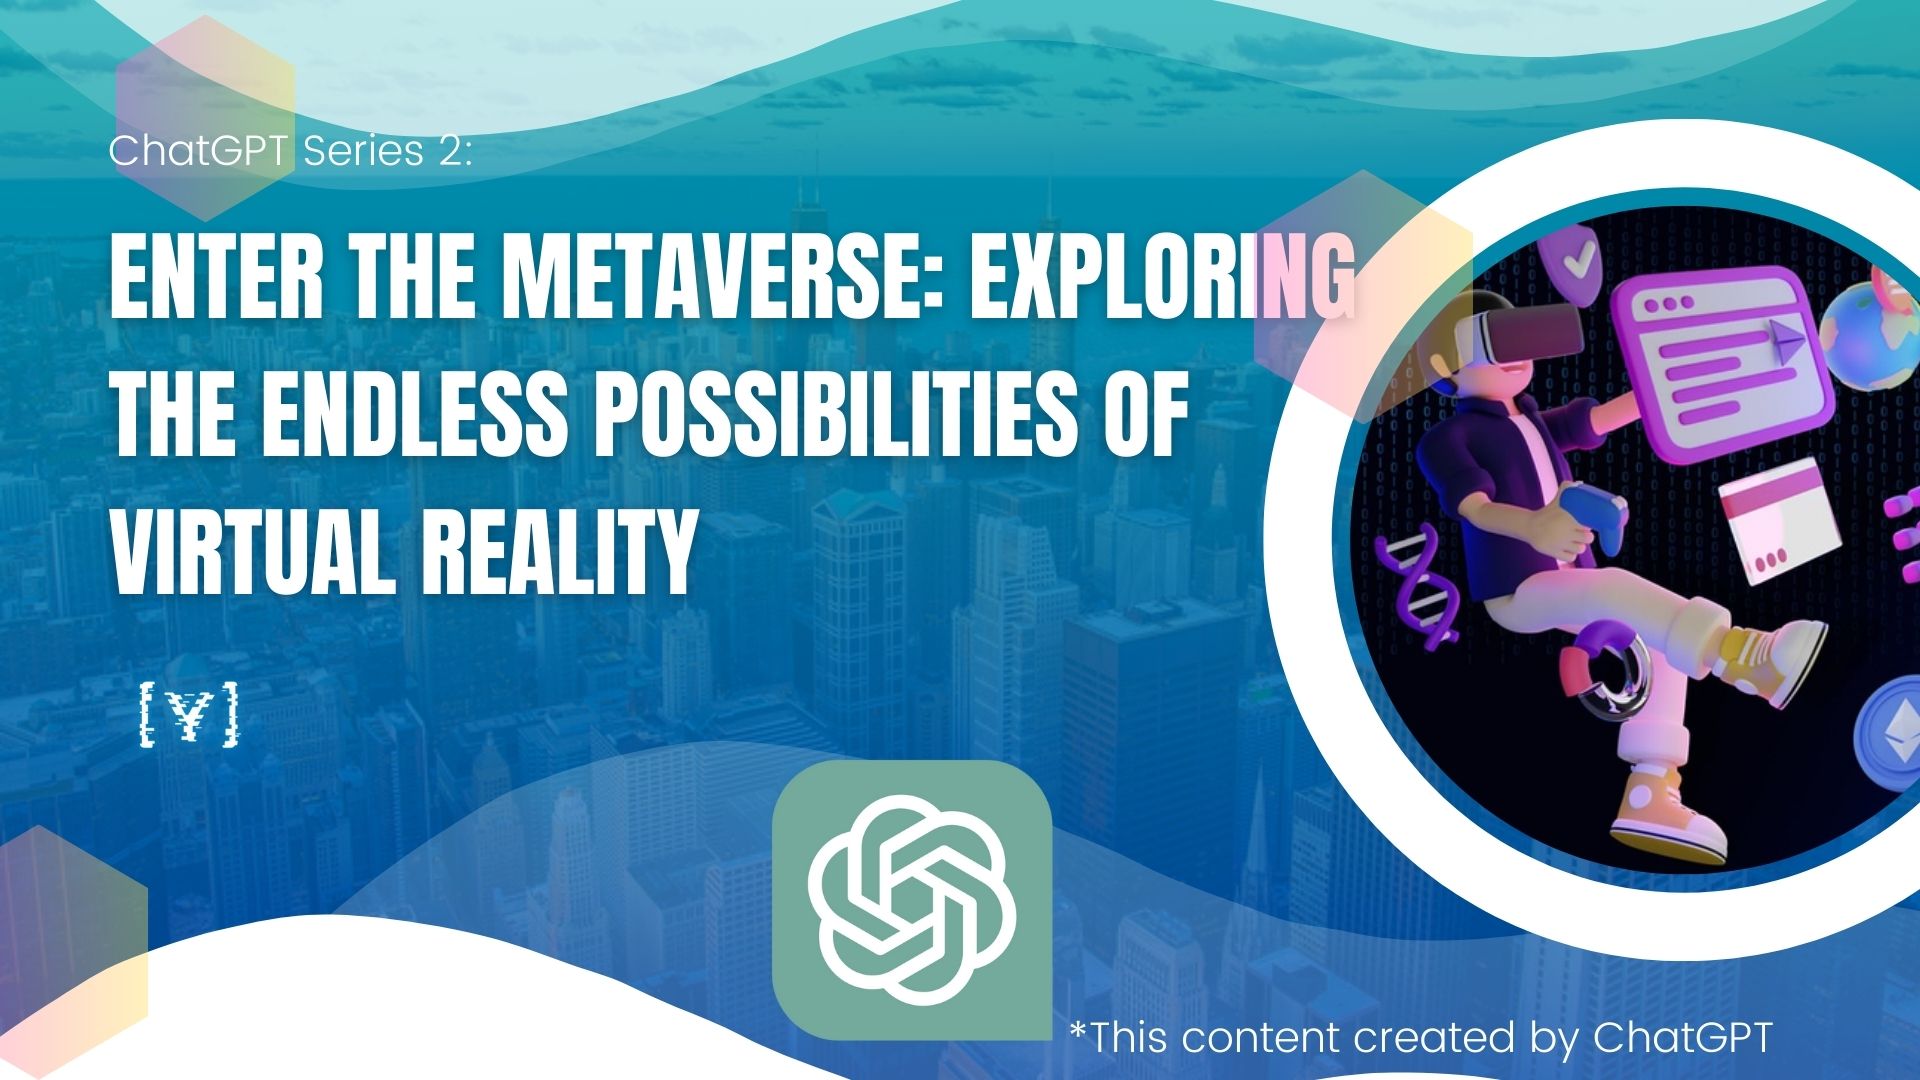 Enter the Metaverse: Exploring the Endless Possibilities of Virtual Reality